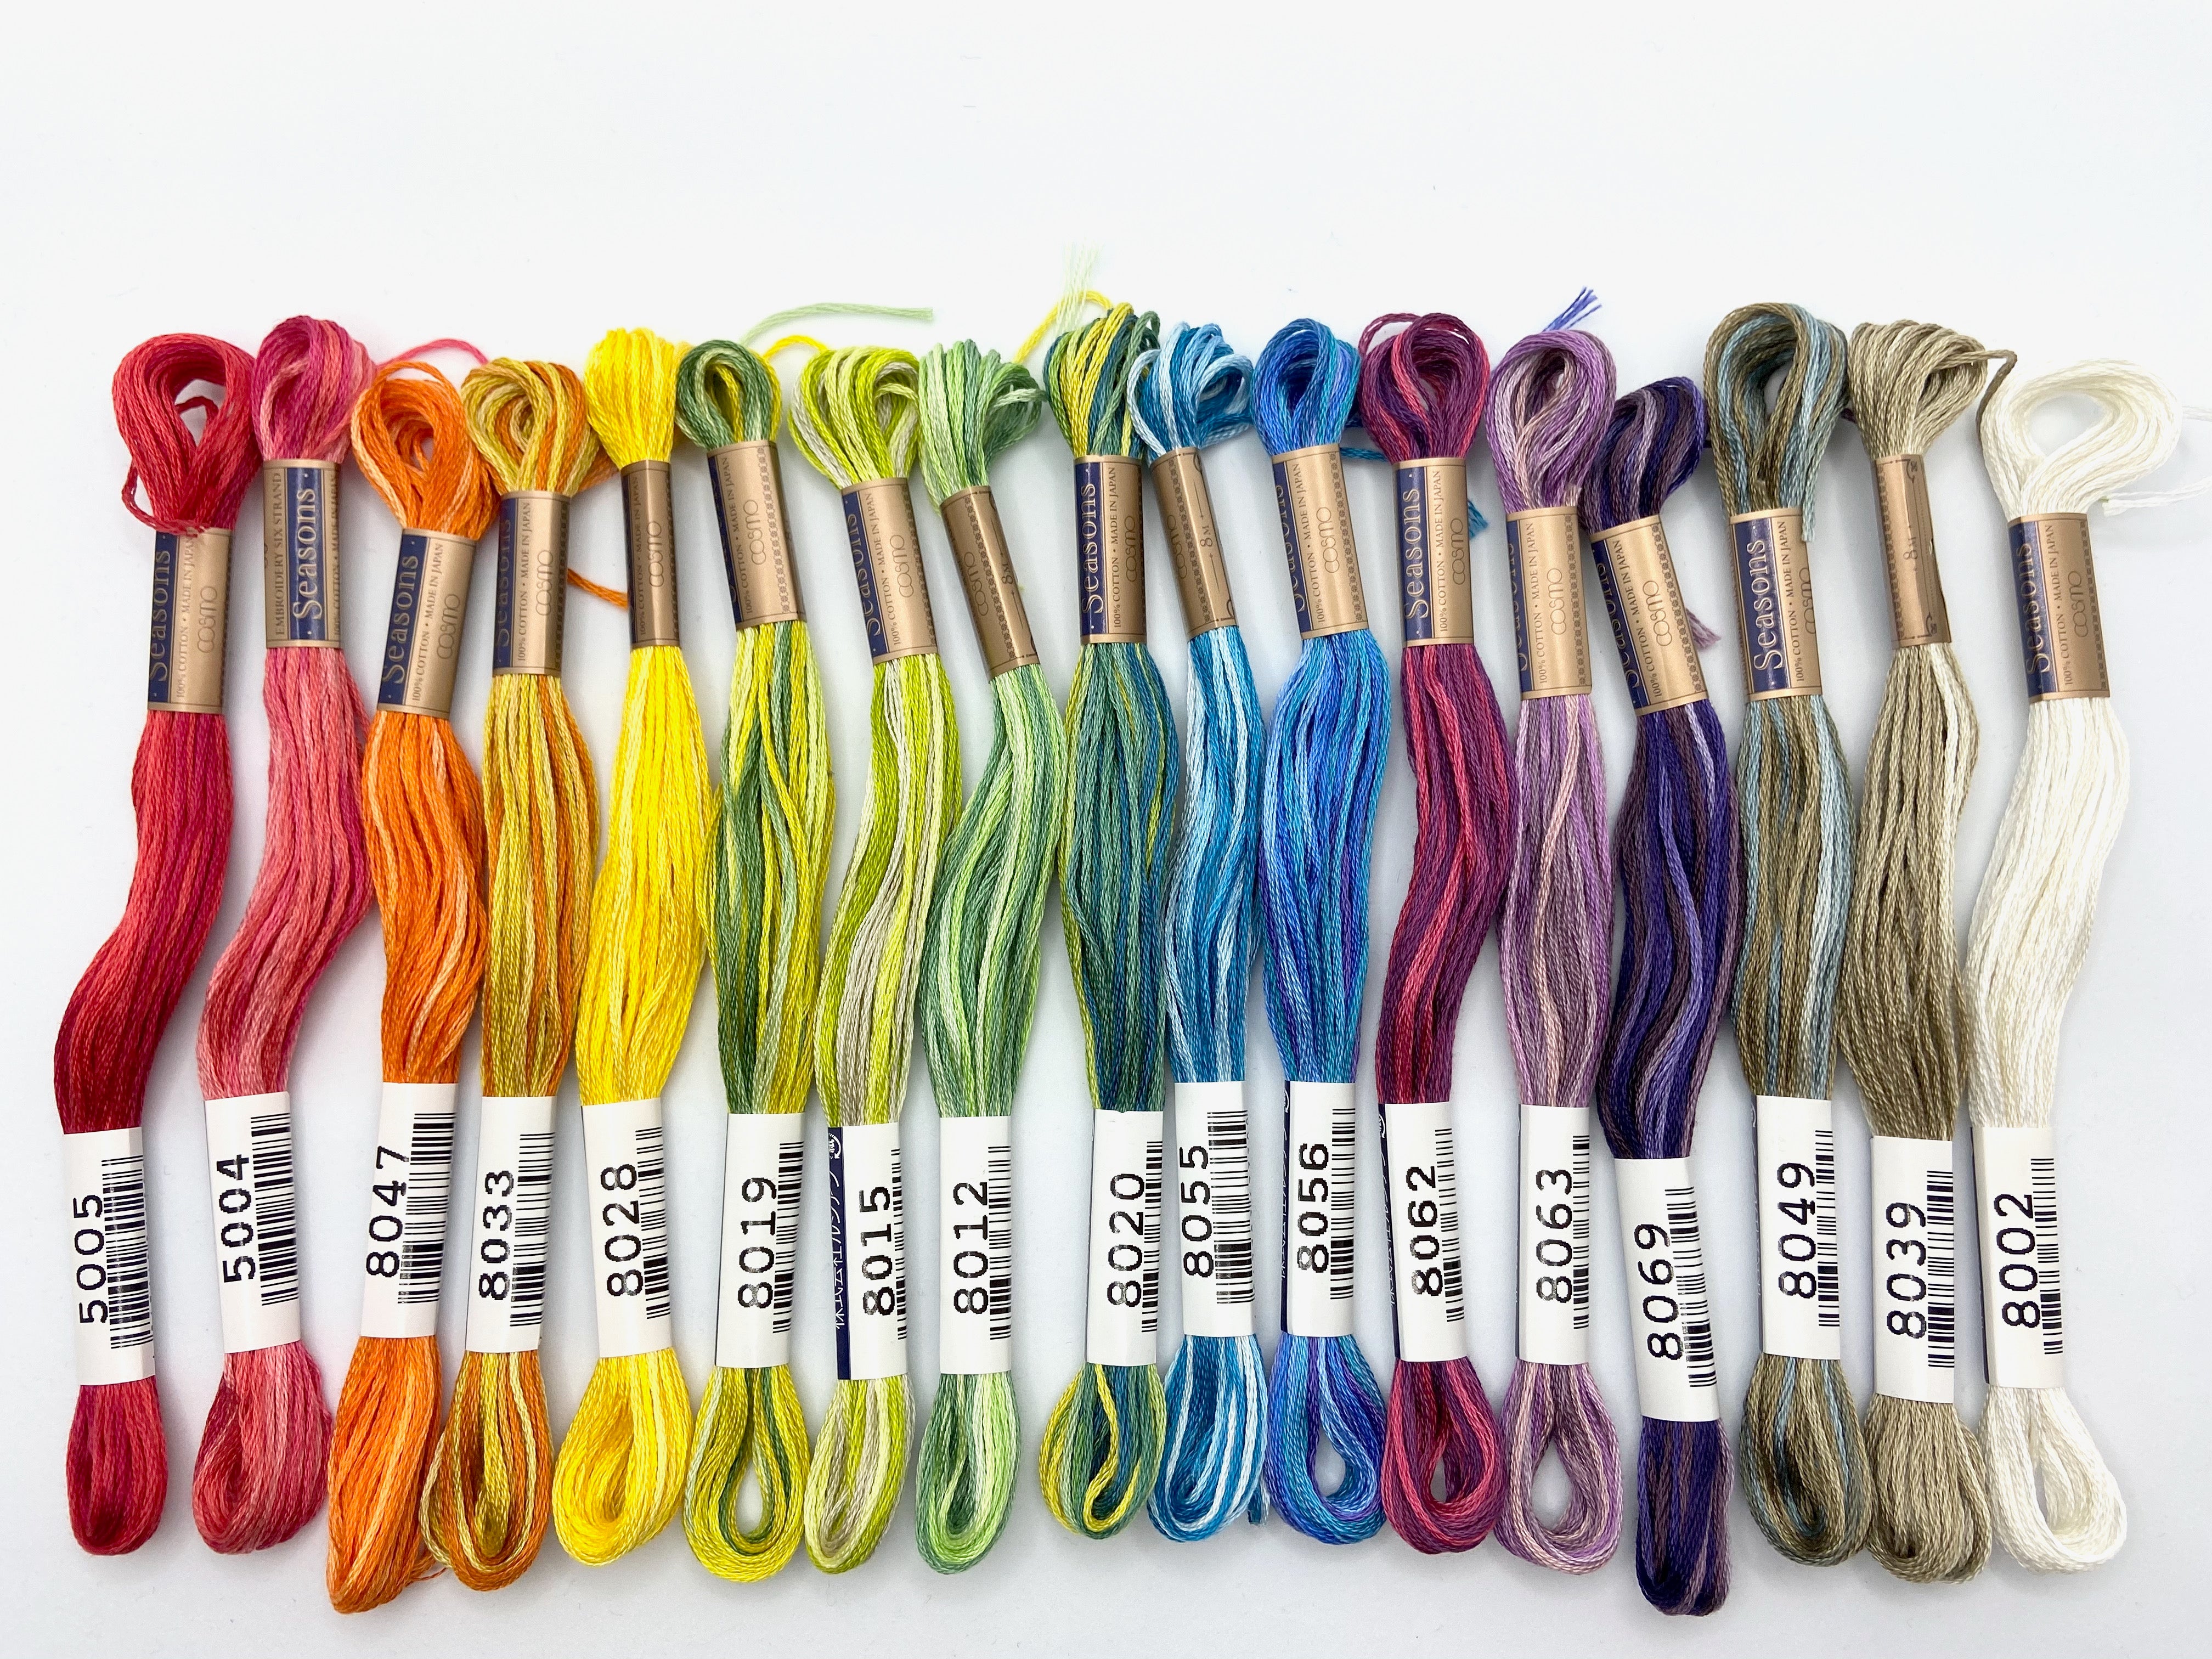 COSMO Seasons Variegated Embroidery Floss - 5001, 5002, 5003, 5004